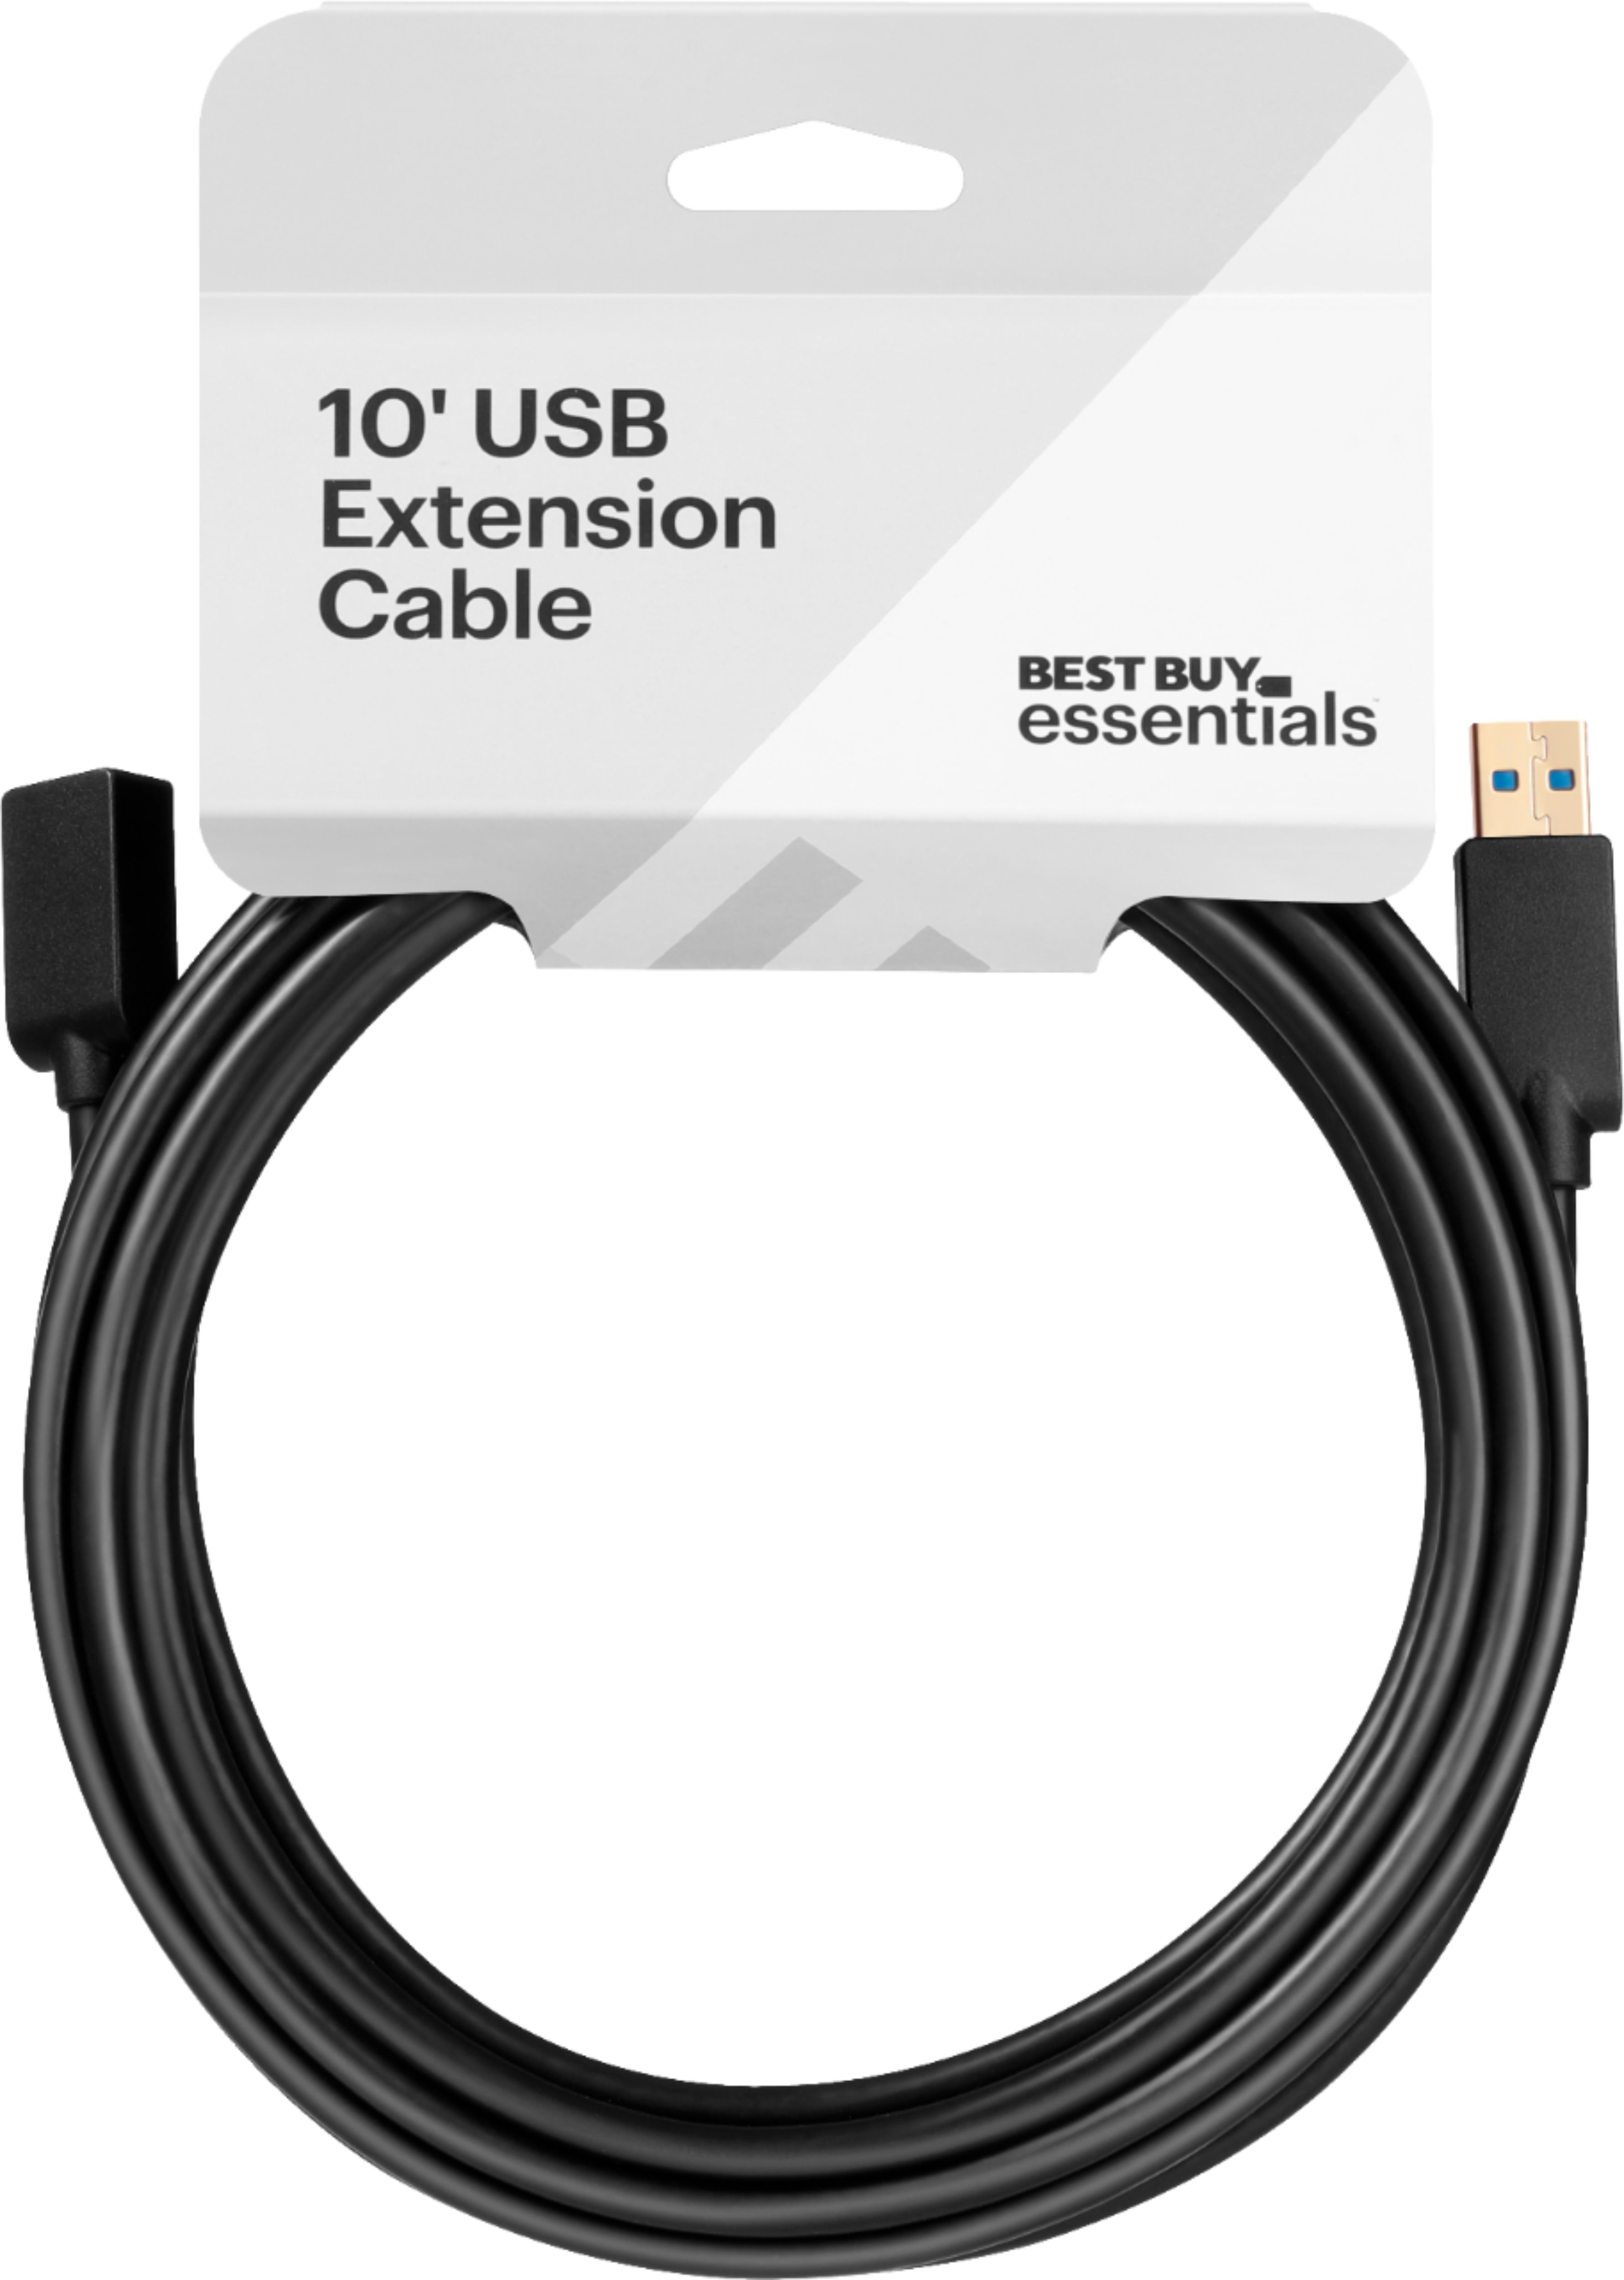 How to Extend Your Webcam's USB Cable 